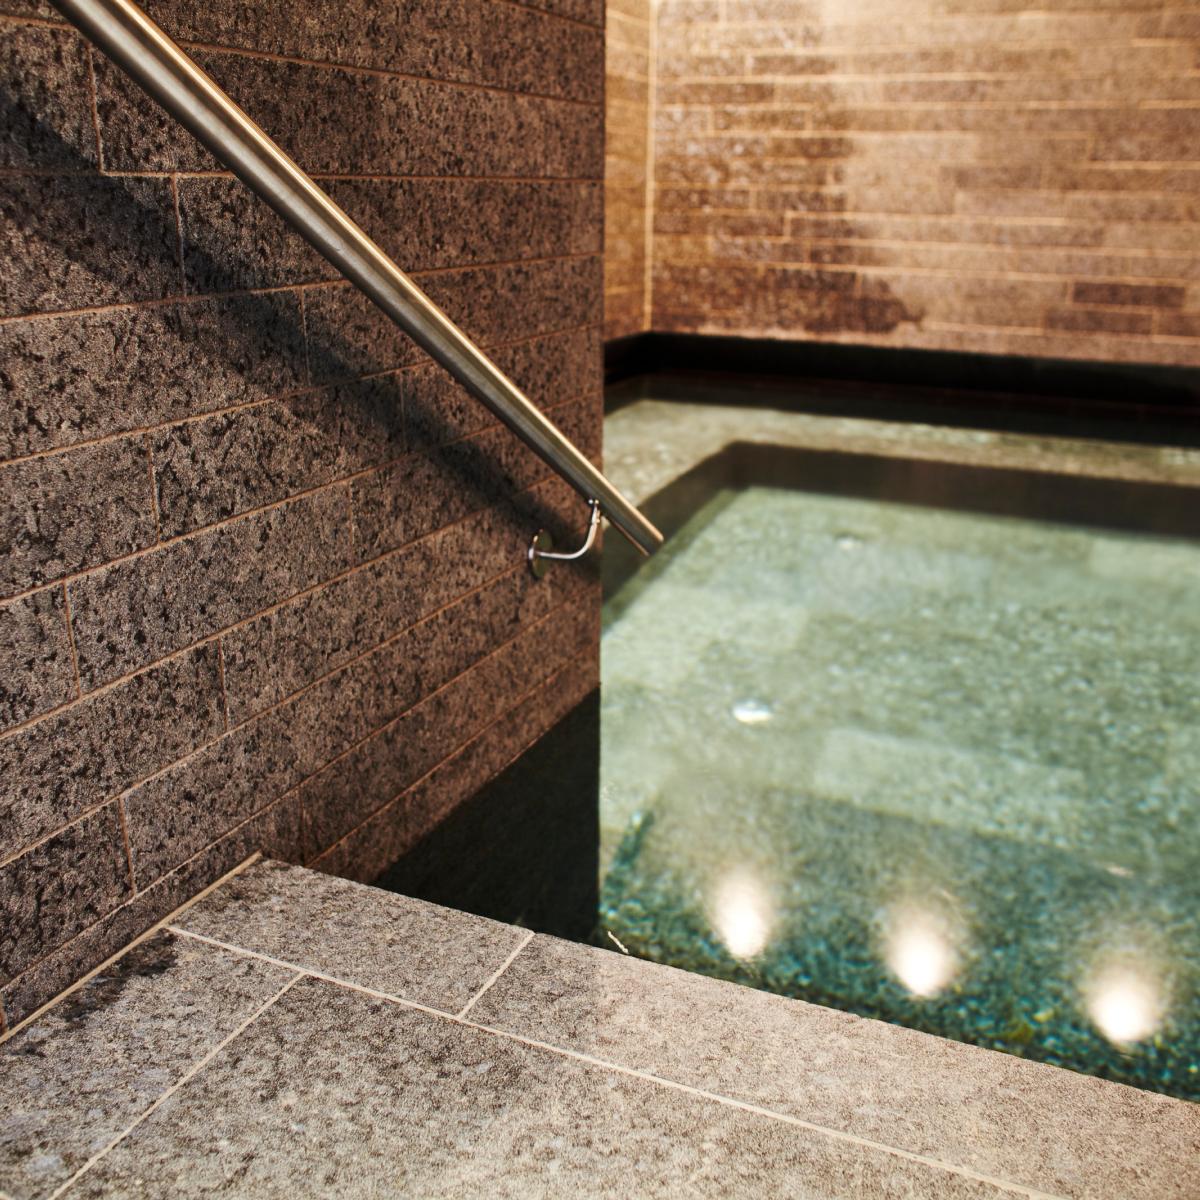 LUNDHS® REAL STONE – Royal® used in Farris Spa Hotel  –  photo courtesy of Morten Rakke for LUNDHS®